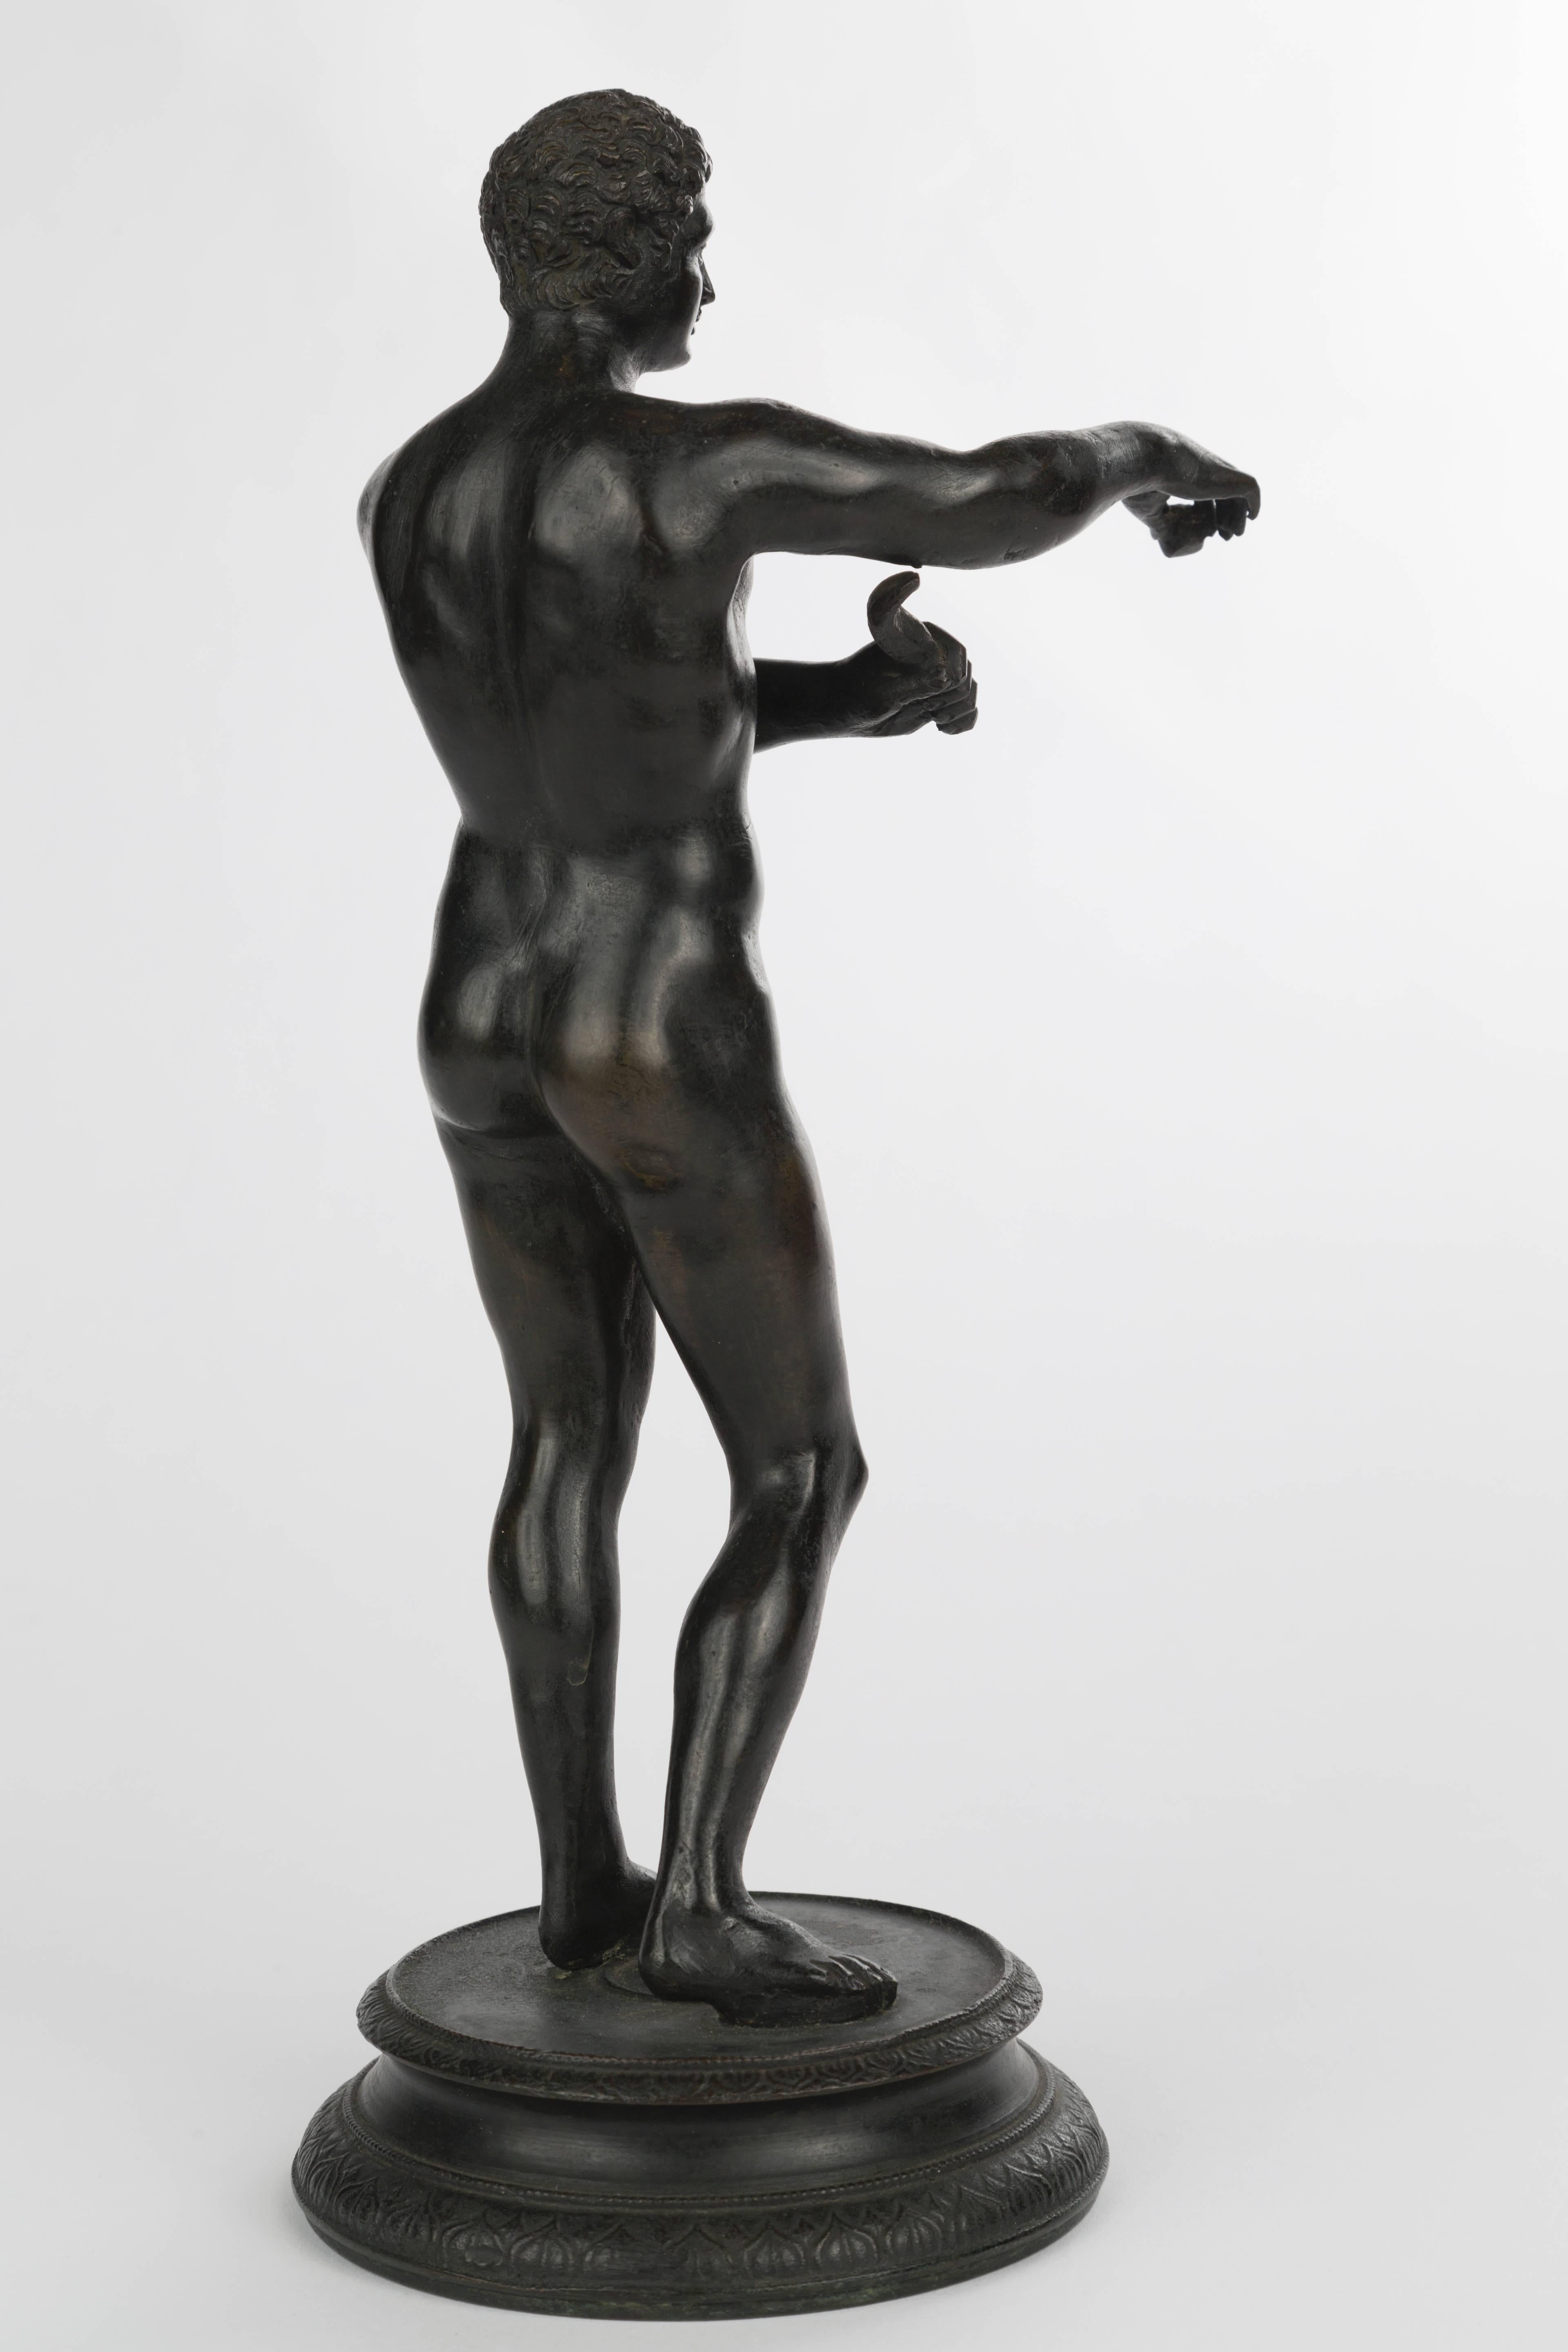 Italian Grand Tour bronze figure of an athlete, Italy, 19th century.
Measures: H 11.5 in.